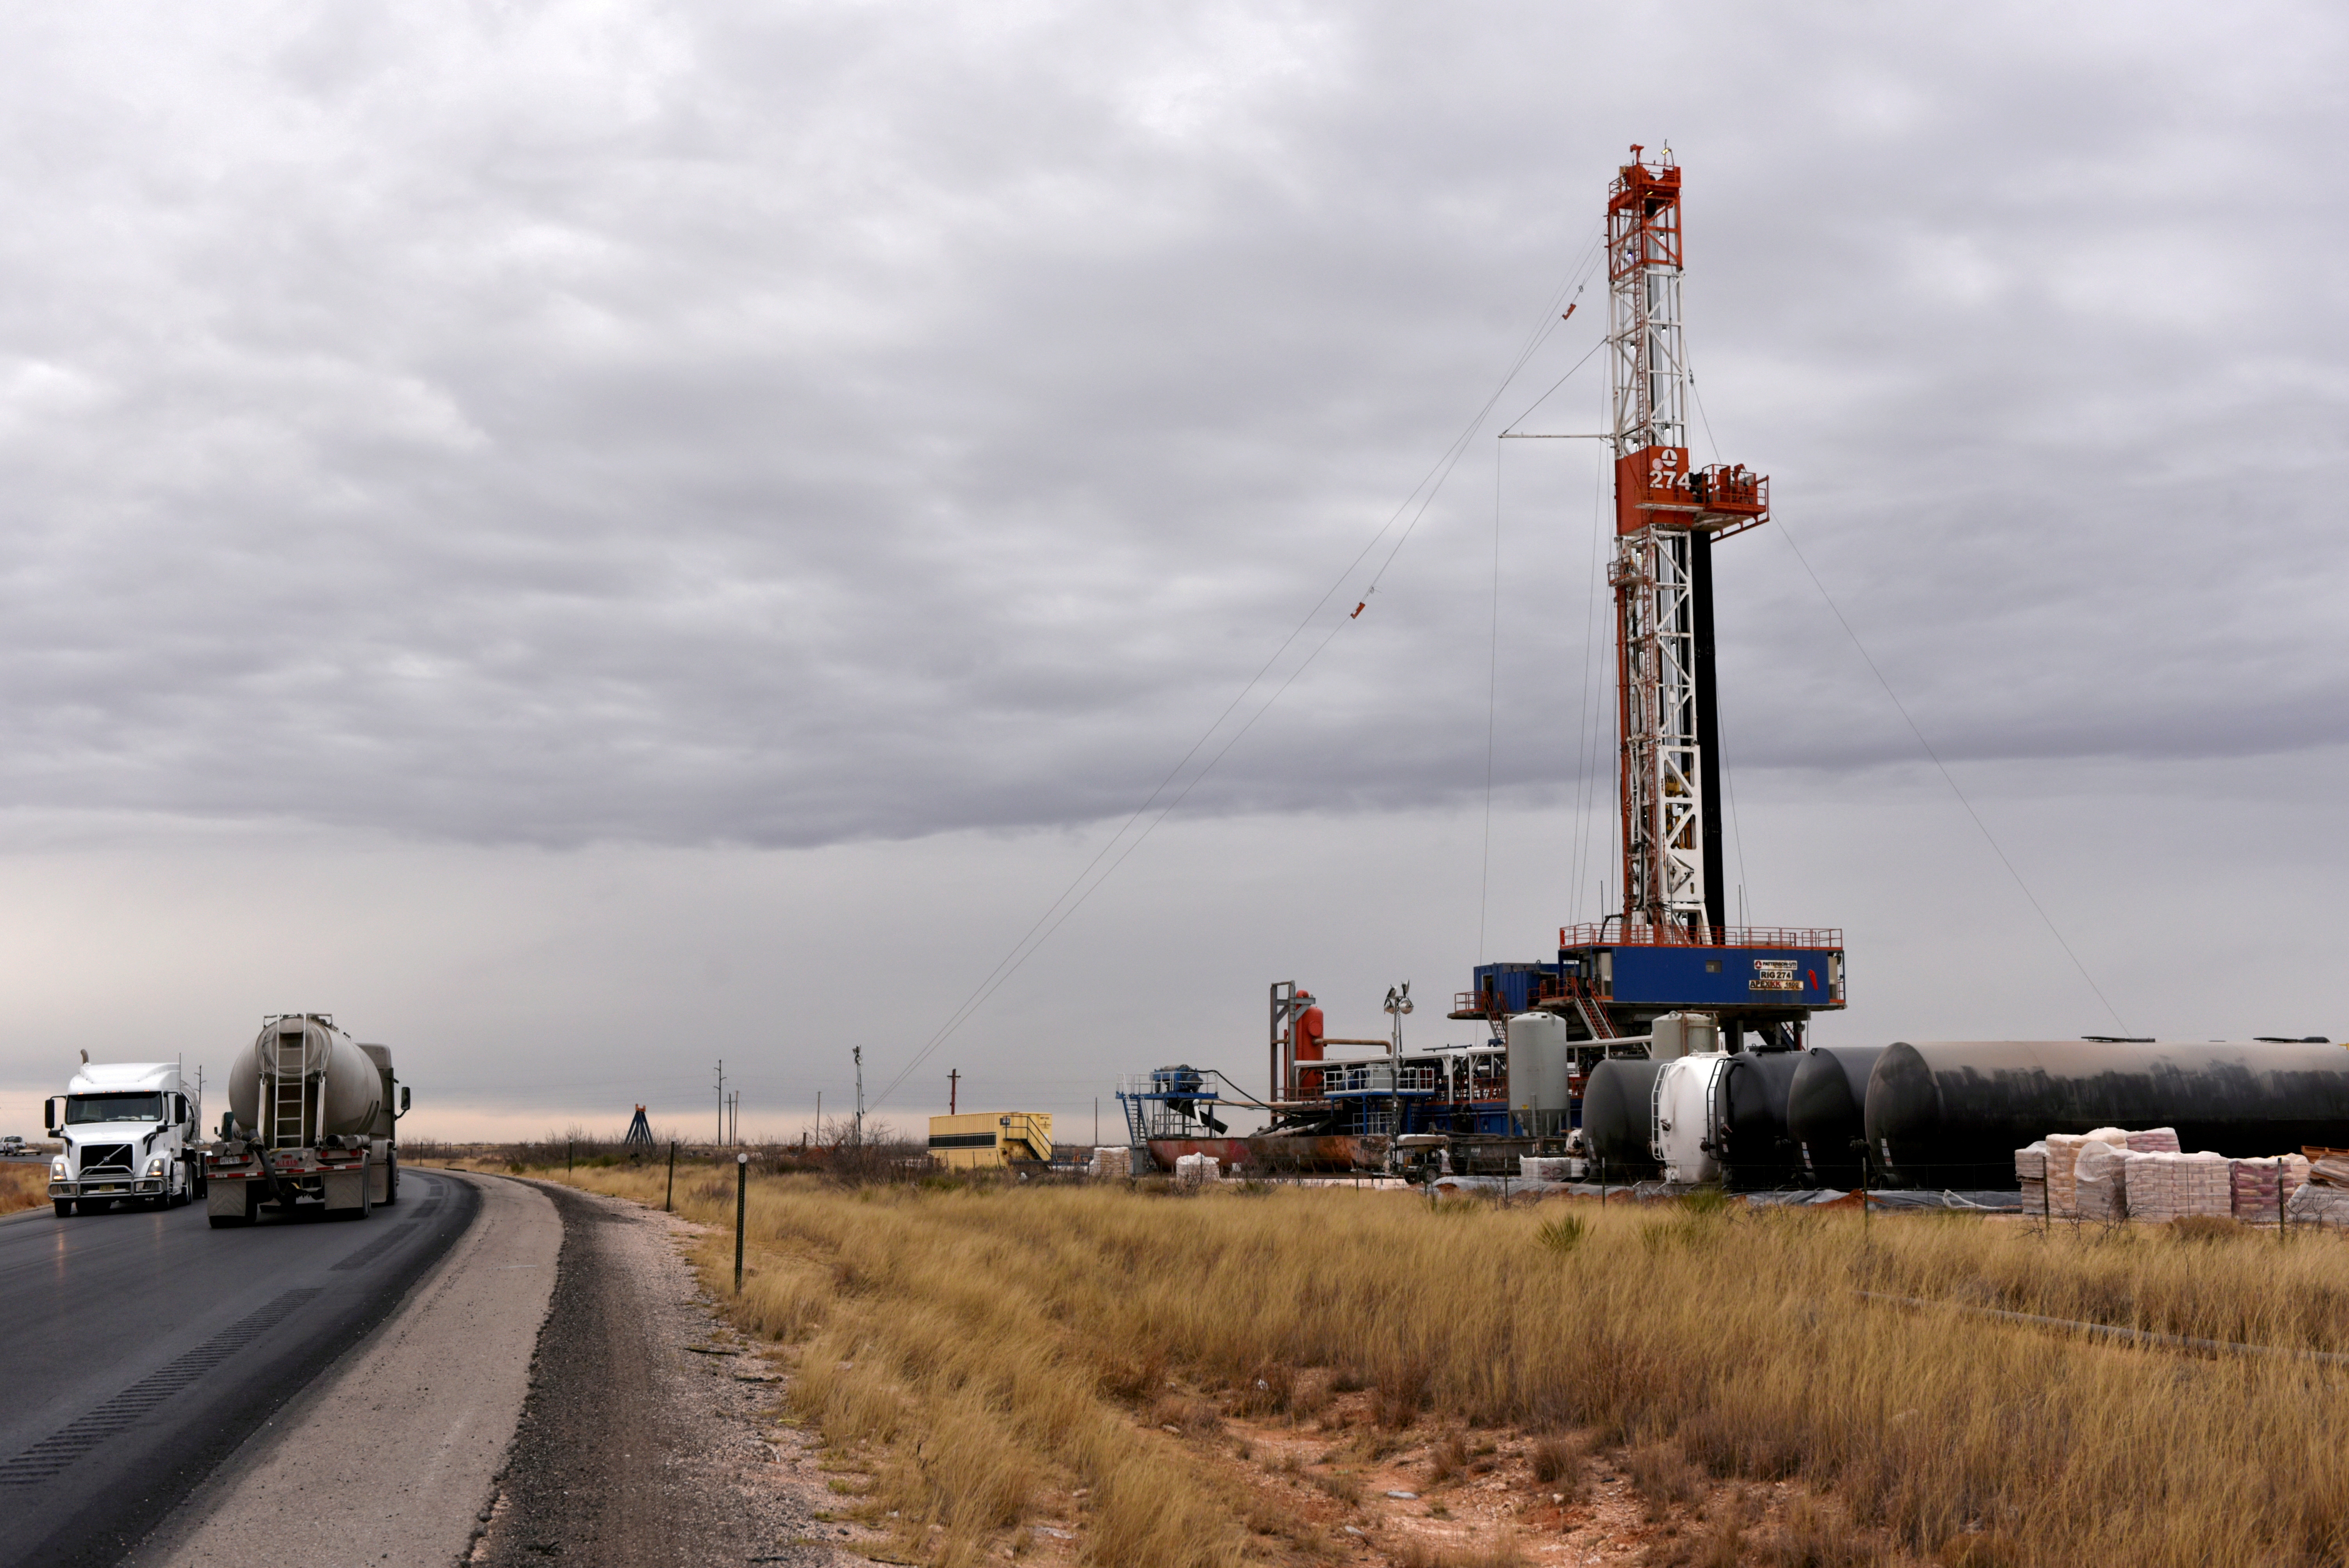 A drilling rig operates in the Permian Basin oil and natural gas production area in Lea County, New Mexico, U.S., February 10, 2019. REUTERS/Nick Oxford/File Photo